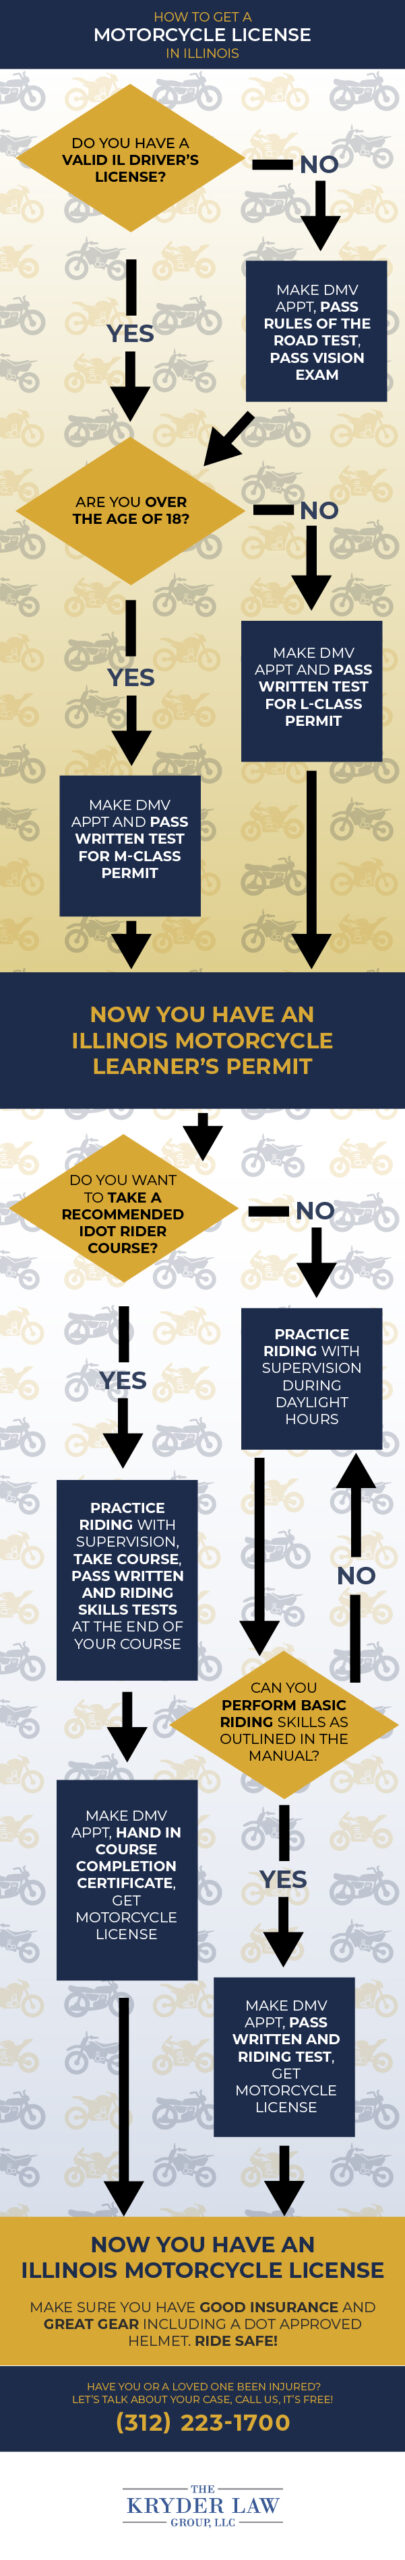 How to Get a Motorcycle License in Illinois